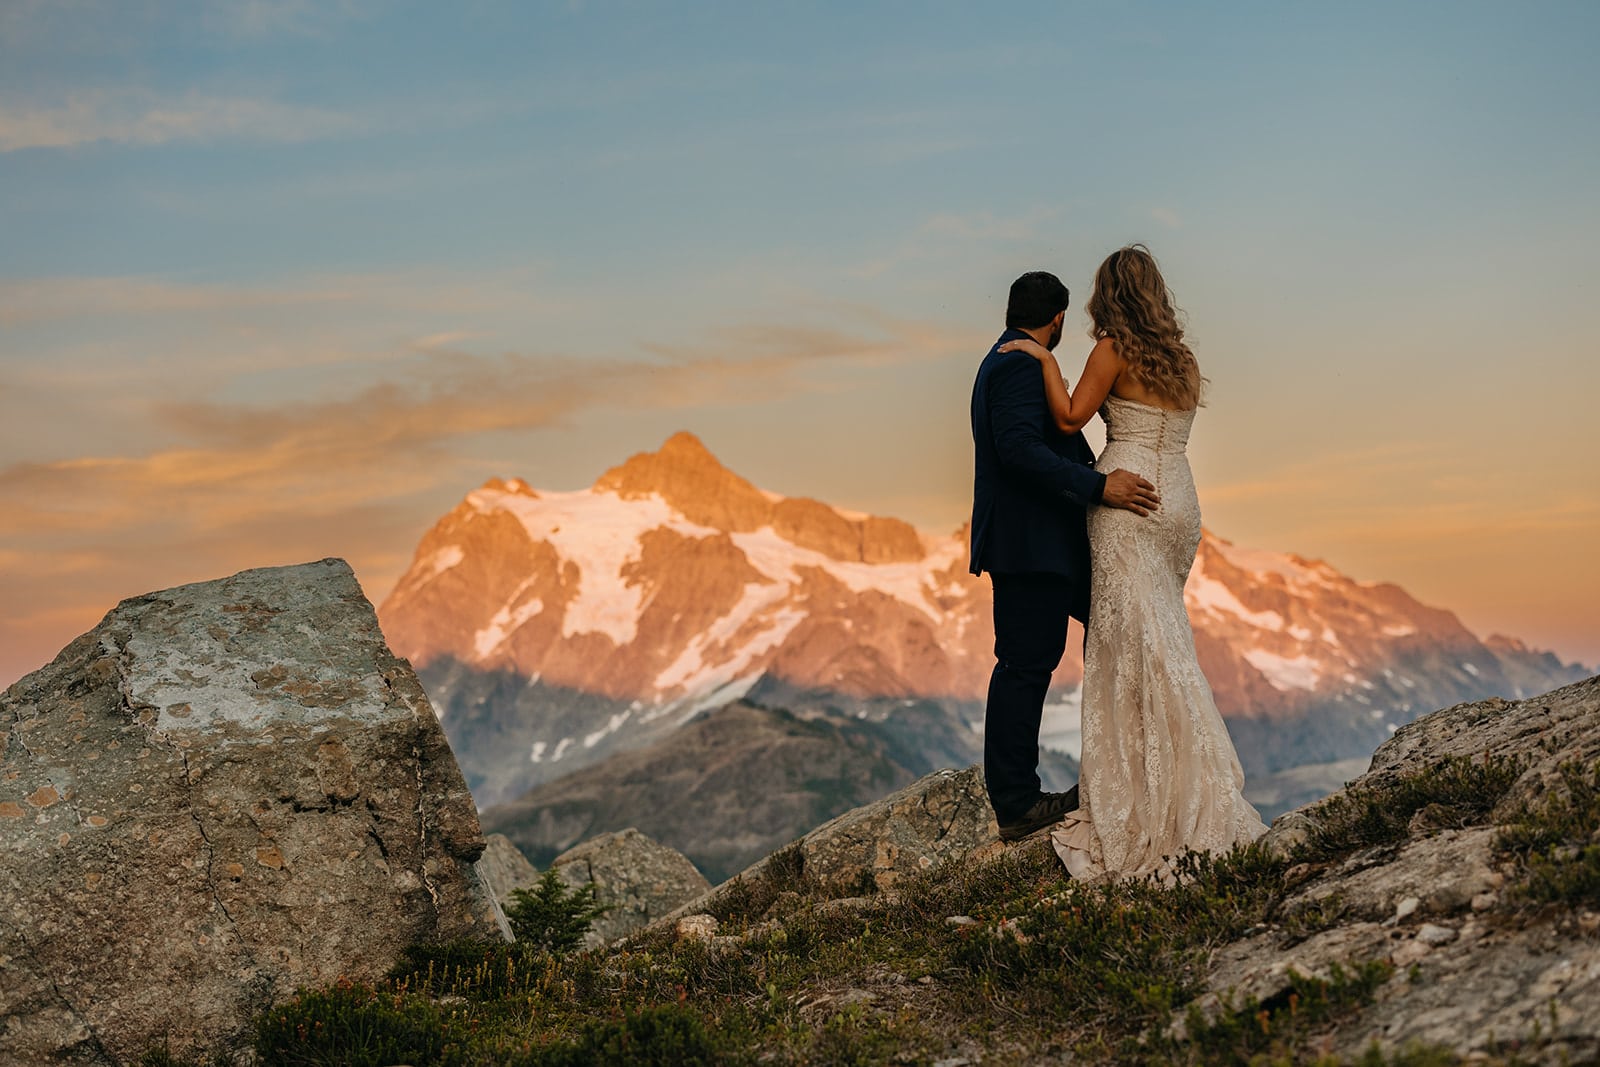 The couple enjoys a colorful sunset in the mountains.